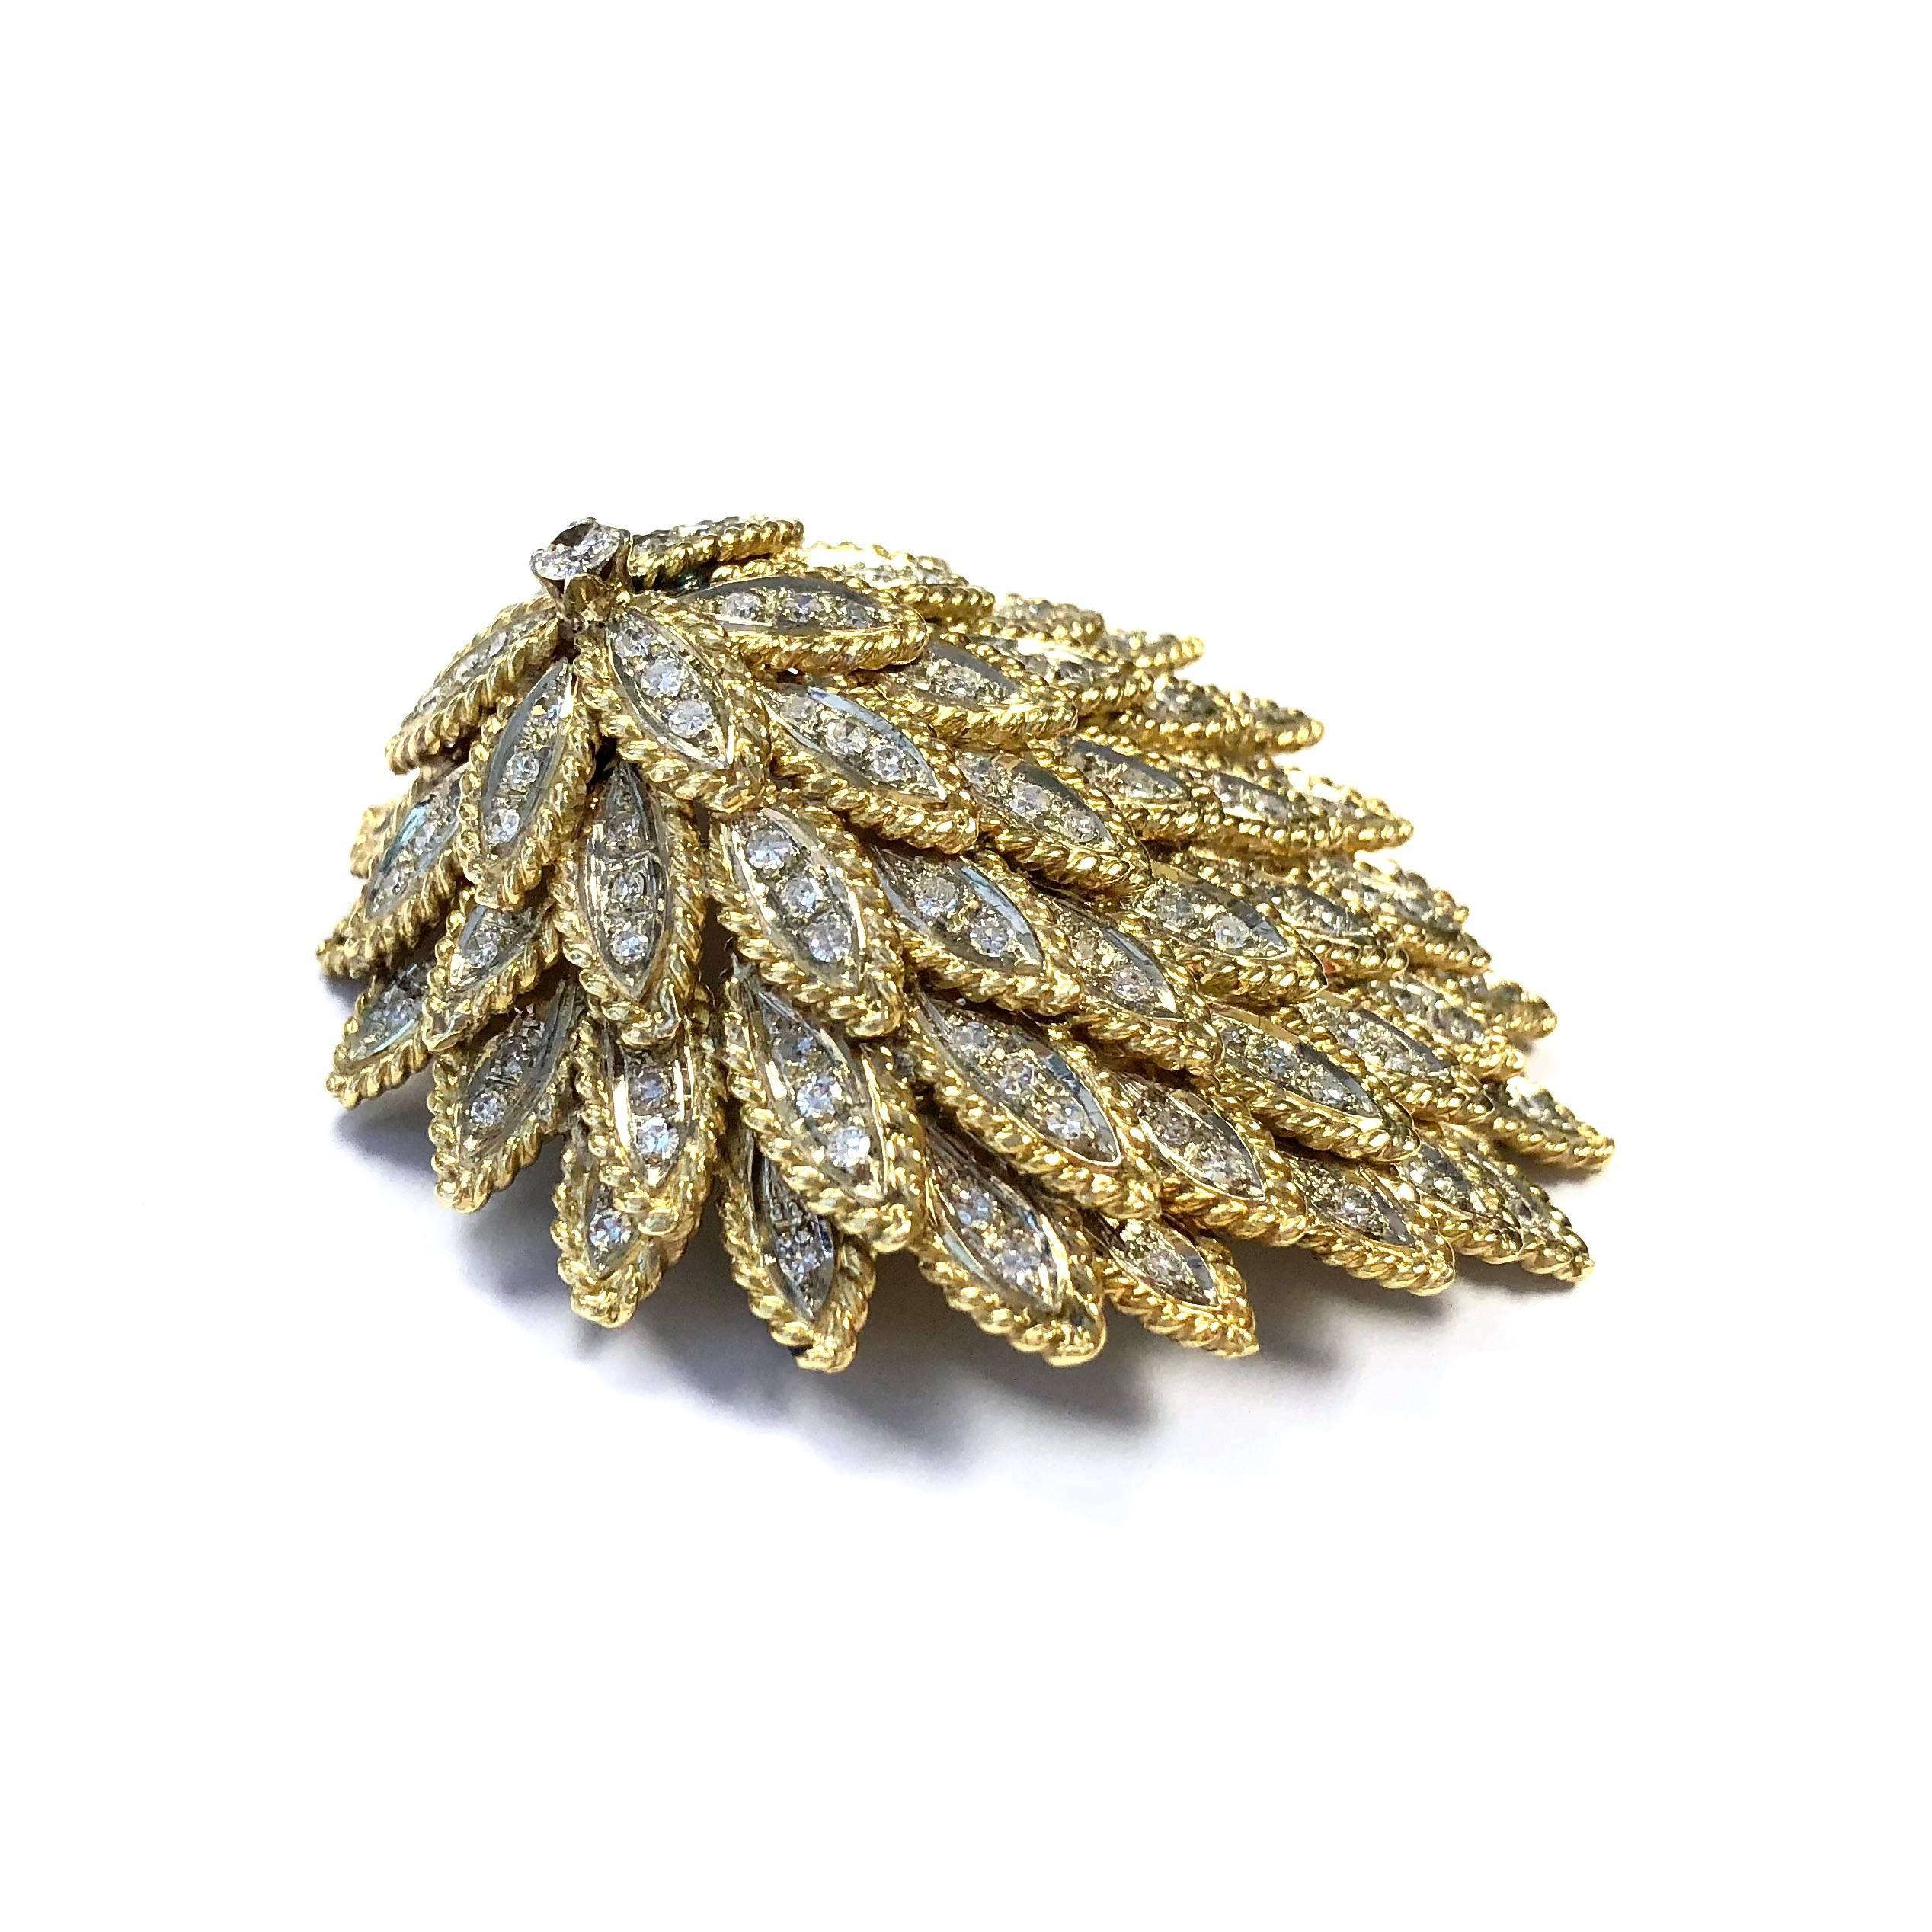 Amazing workmanship paired with high quality materials. Crafted in 18K gold, composed of a multi-tiered three dimentional design of diamond set feathers.
Each feather features a three single cut diamond set, marquise shape white gold section